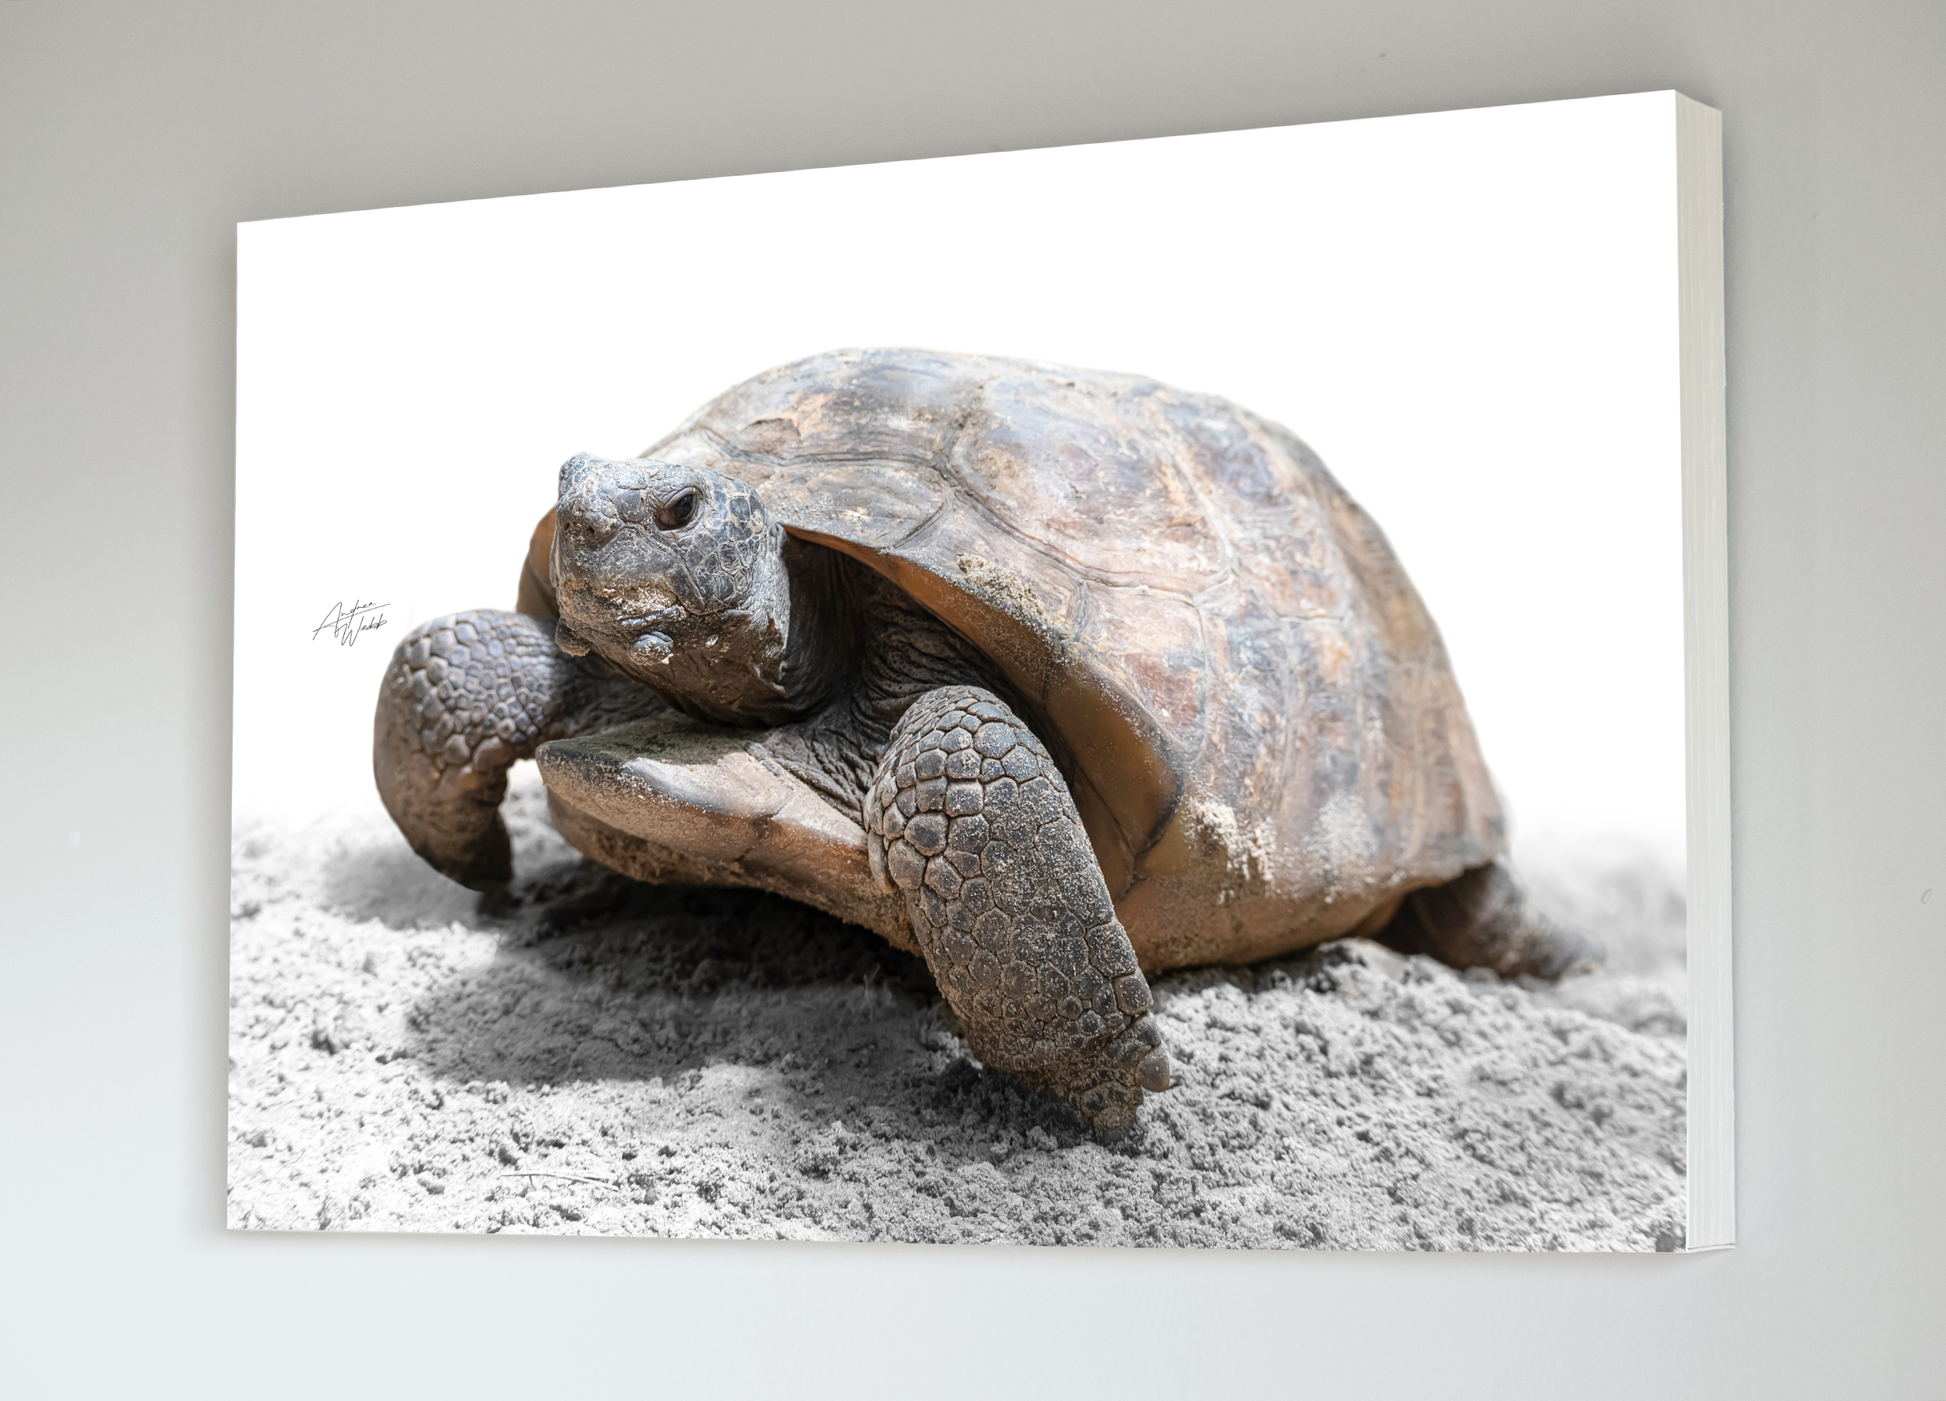 gopher tortoise close up portrait, gopher tortoise portrait, gopher tortoise artwork, gopher tortoise art, gopher tortoise wall art, gopher tortoise canvases, gopher tortoise gifts.